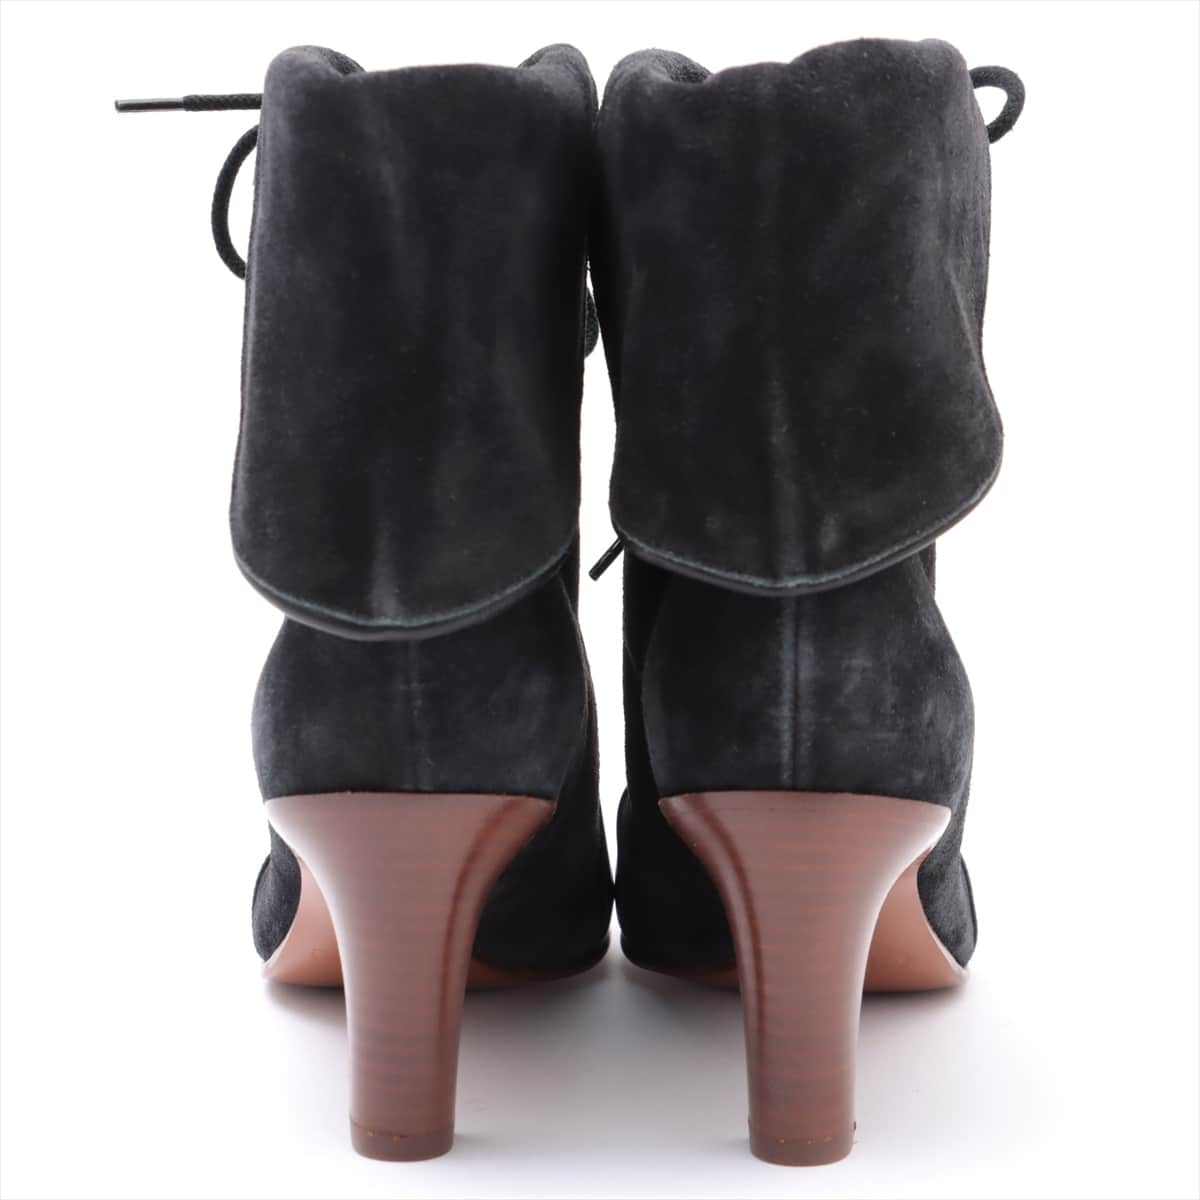 Chloe Leather & suede Boots 36 Ladies' Black x Gray